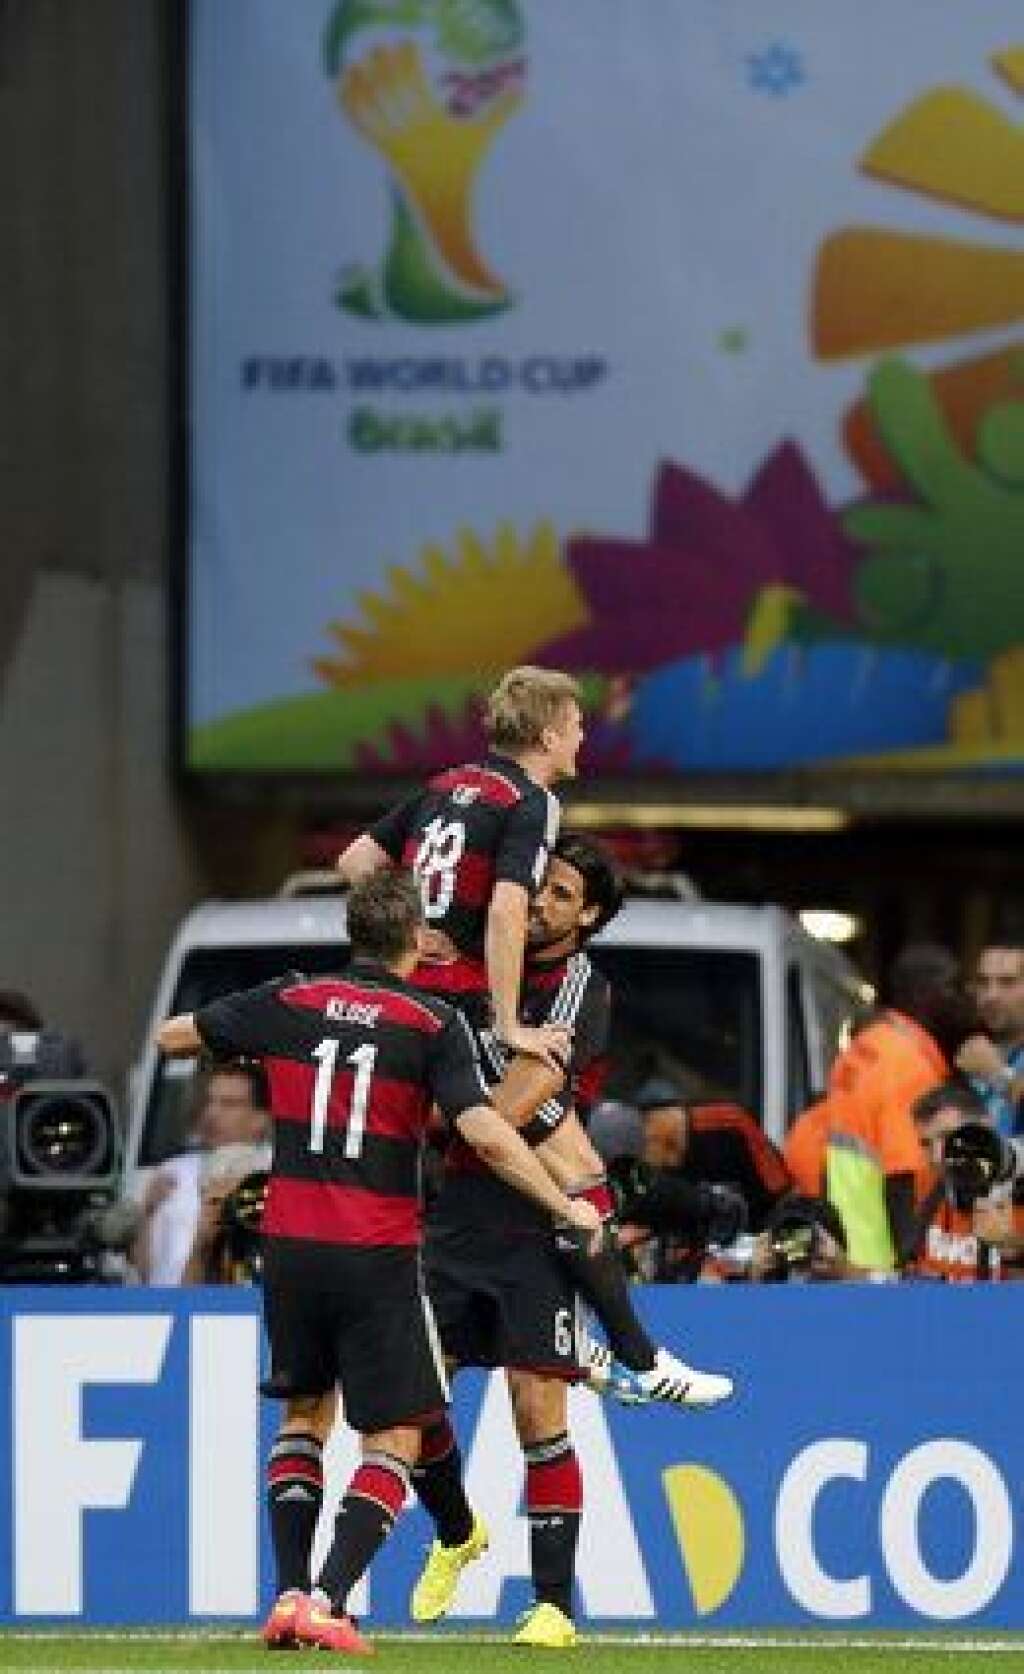 Brazil Soccer WCup Brazil Germany - Germany's Miroslav Klose, Toni Kroos and Sami Khedira, from left, celebrate after scoring during the World Cup semifinal soccer match between Brazil and Germany at the Mineirao Stadium in Belo Horizonte, Brazil, Tuesday, July 8, 2014. (AP Photo/Frank Augstein)